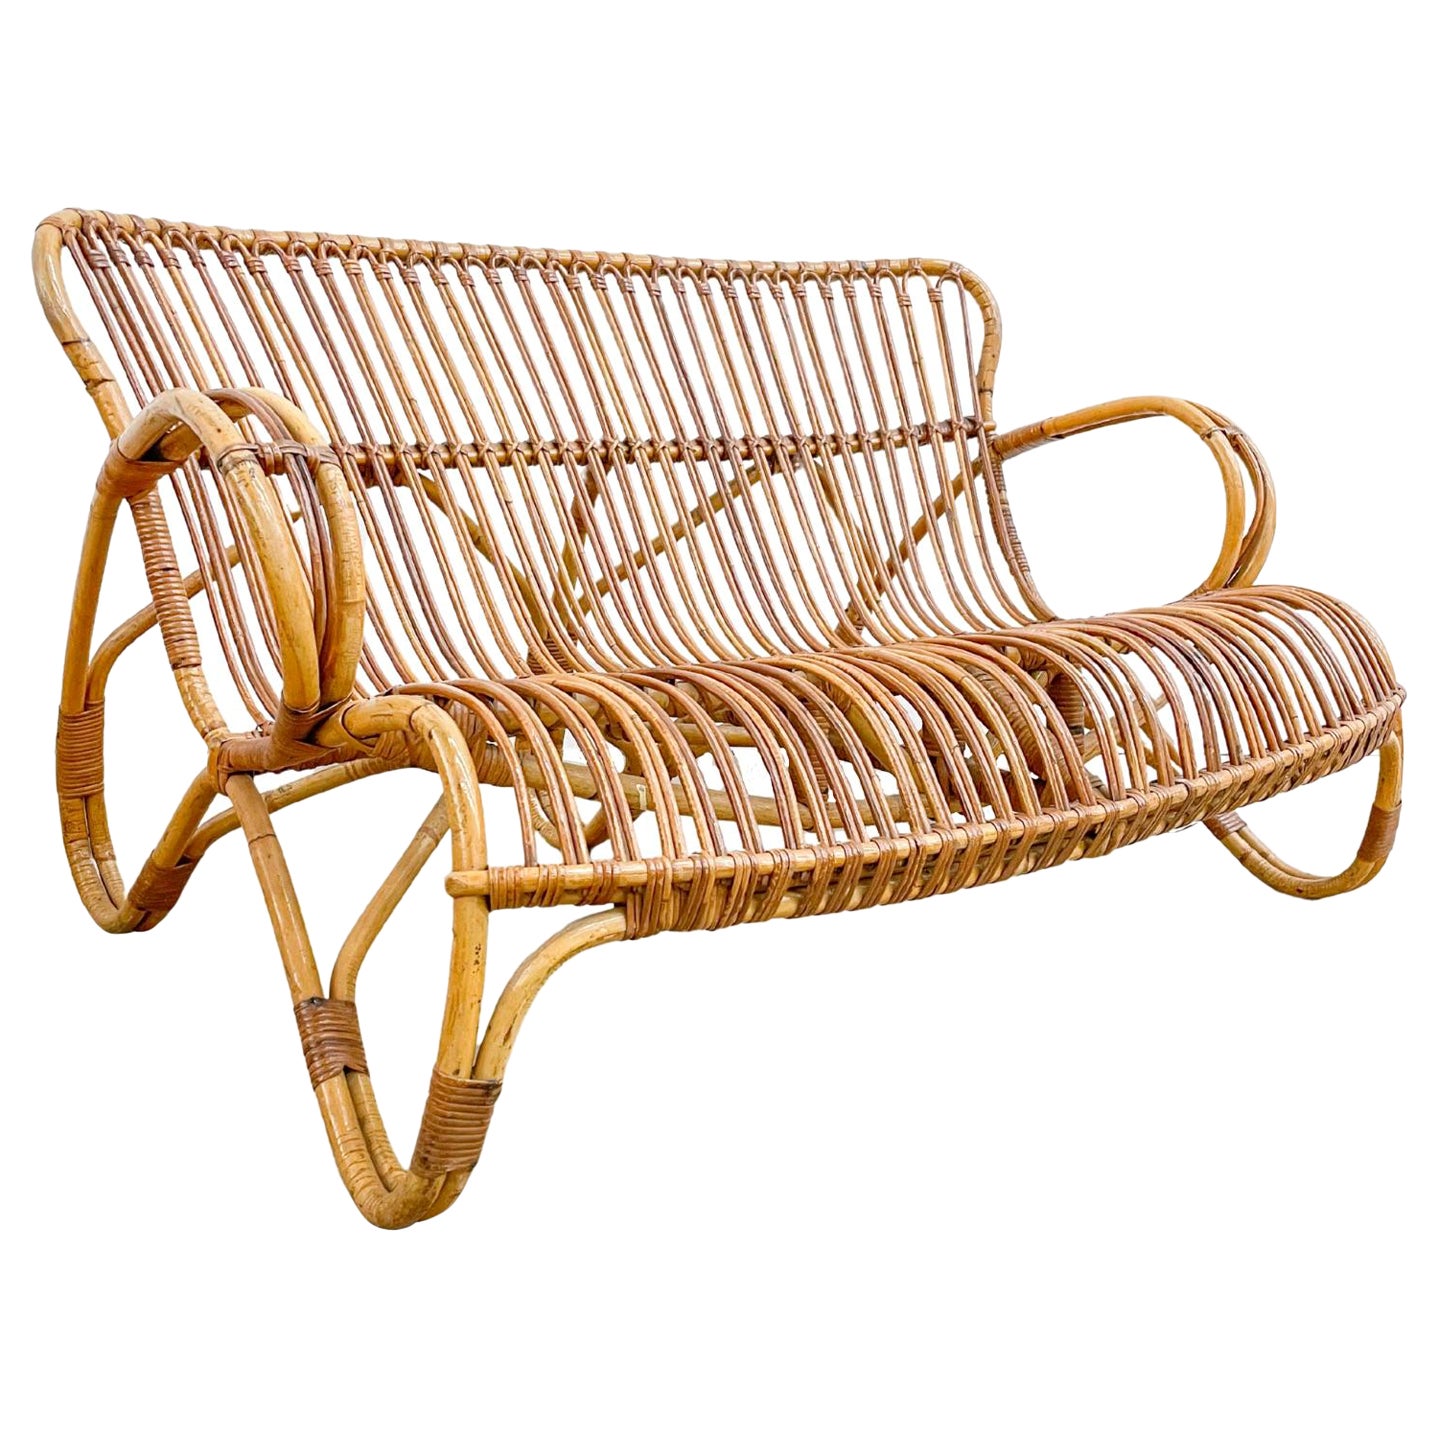 Vintage Sculptural Bamboo Sofa by Rohe Noorwolde, 1960s For Sale